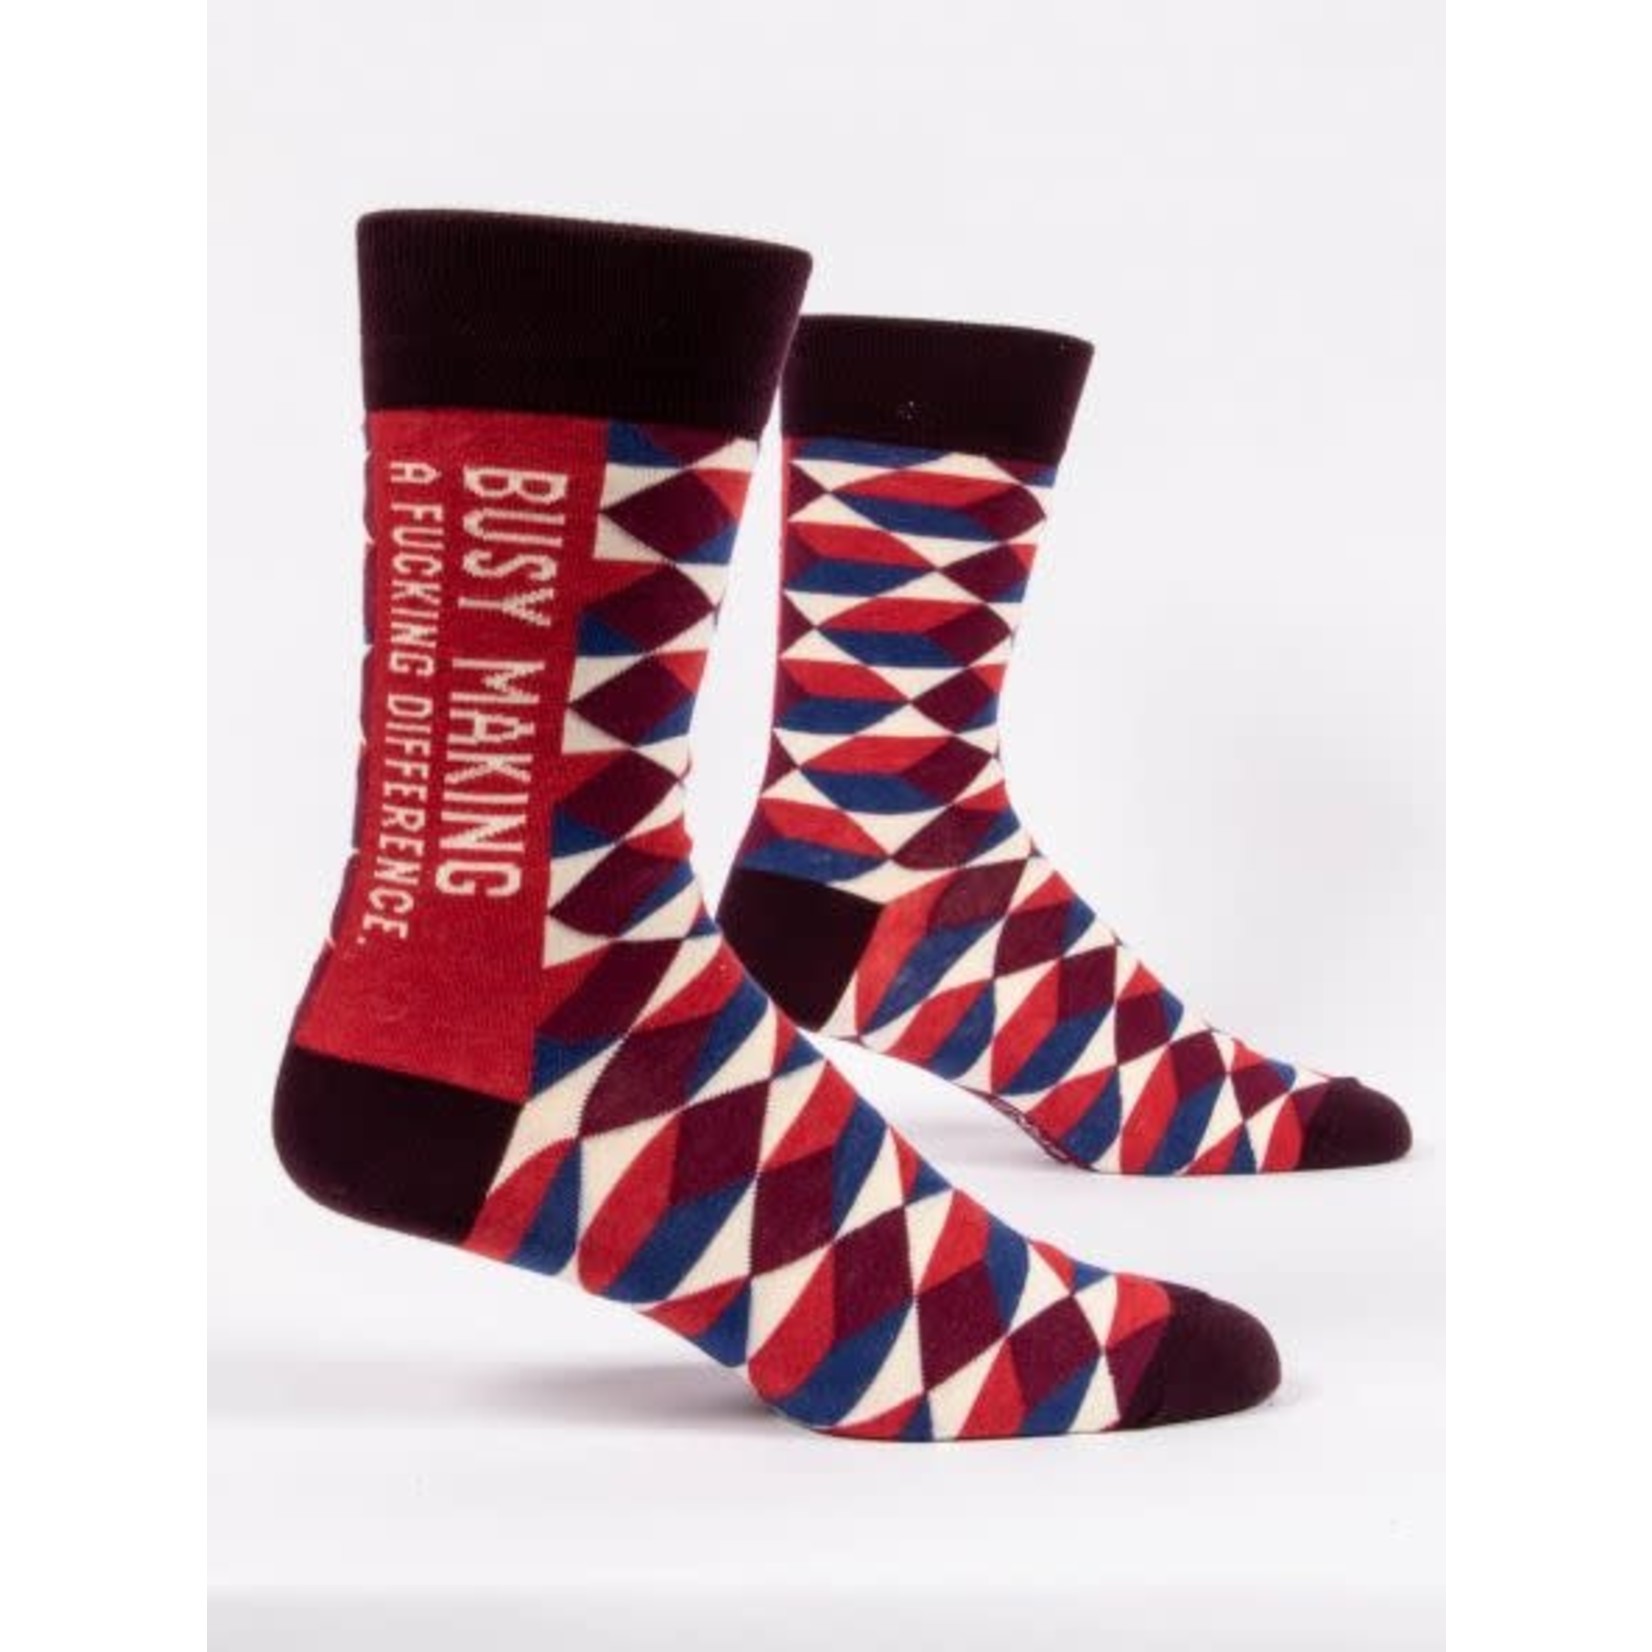 Men's Socks - Busy Making A Fucking Difference,